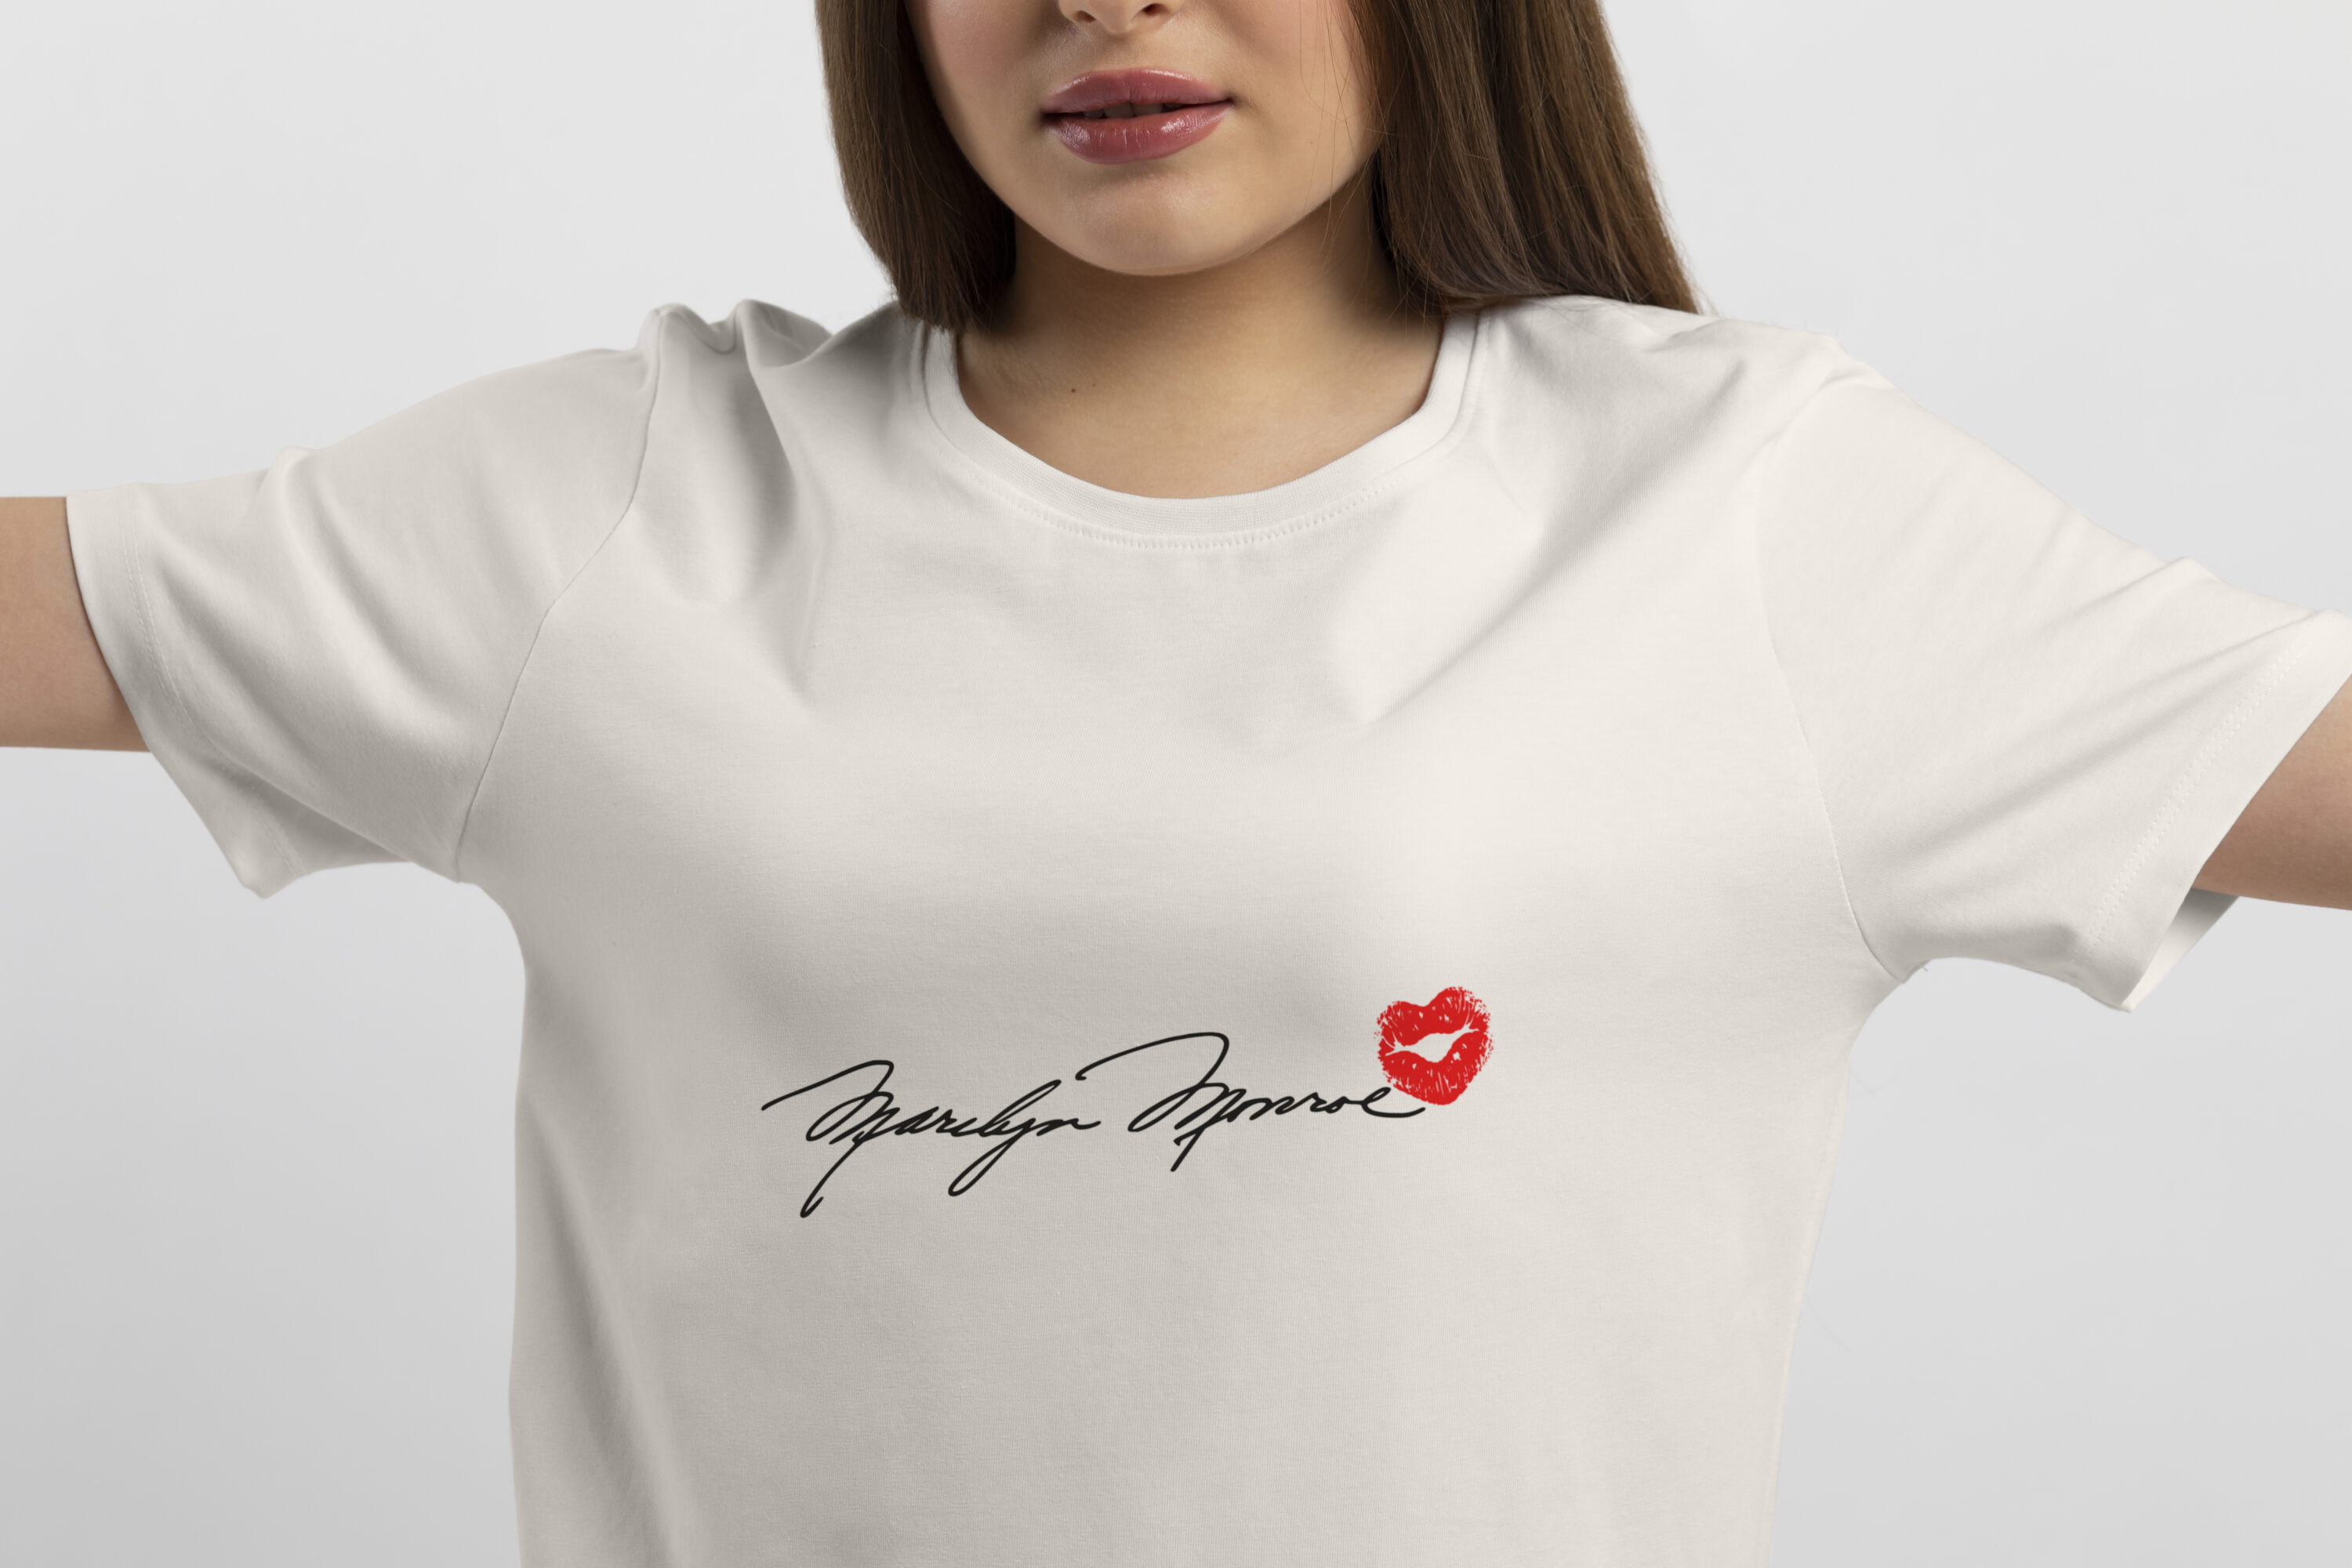 Image of a white t-shirt with an amazing print of Marilyn Monroe signature.